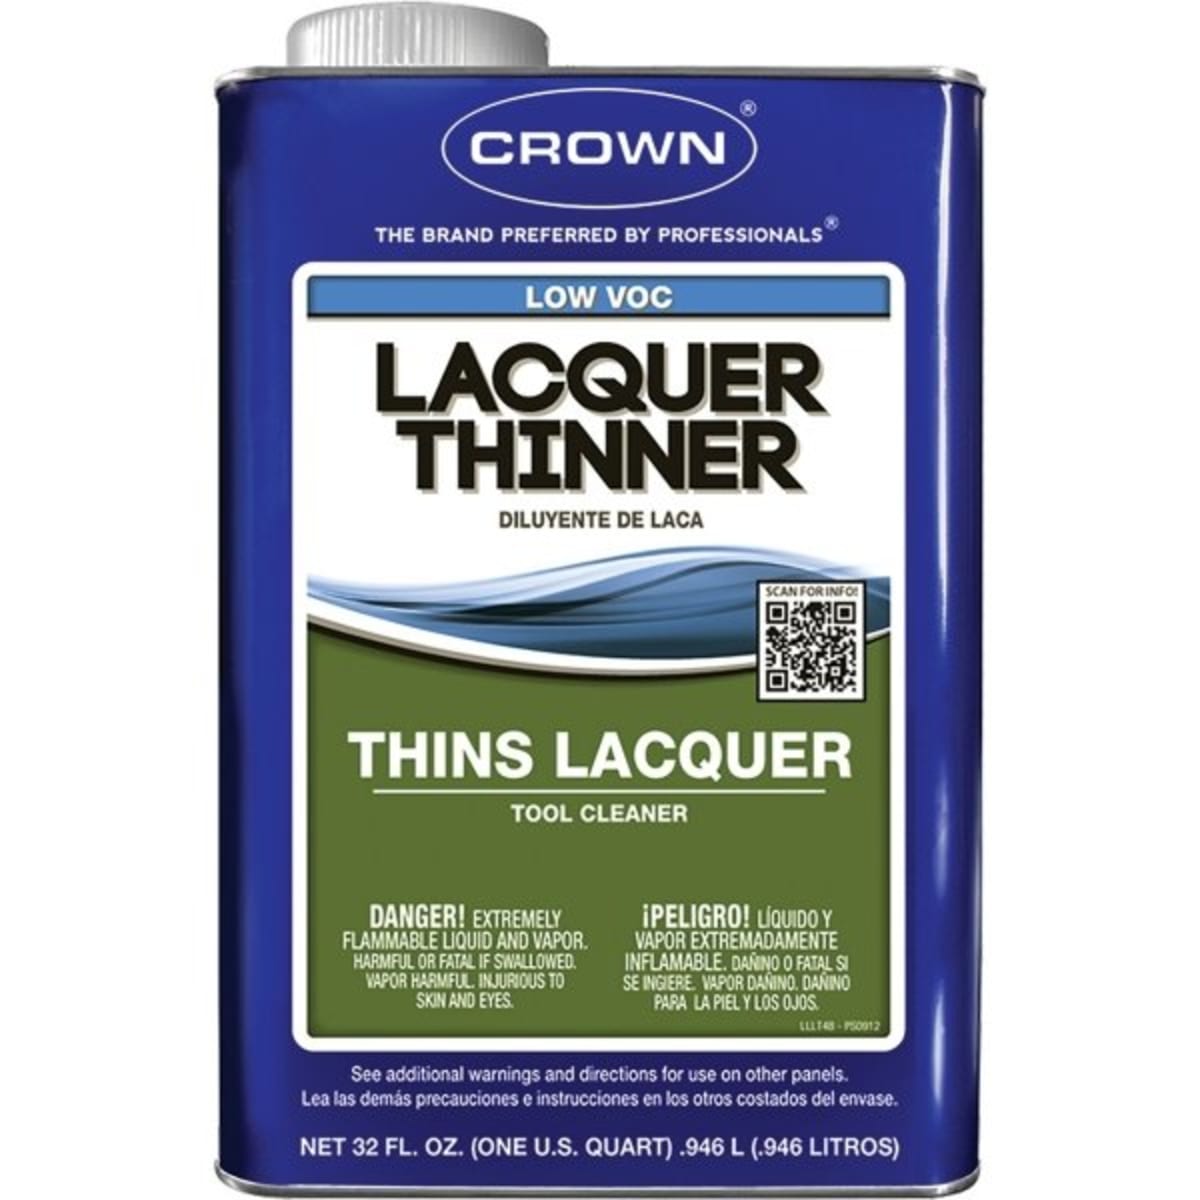 Crown OP.M.64 Qt Odorless Paint Thinner, Package Of 6